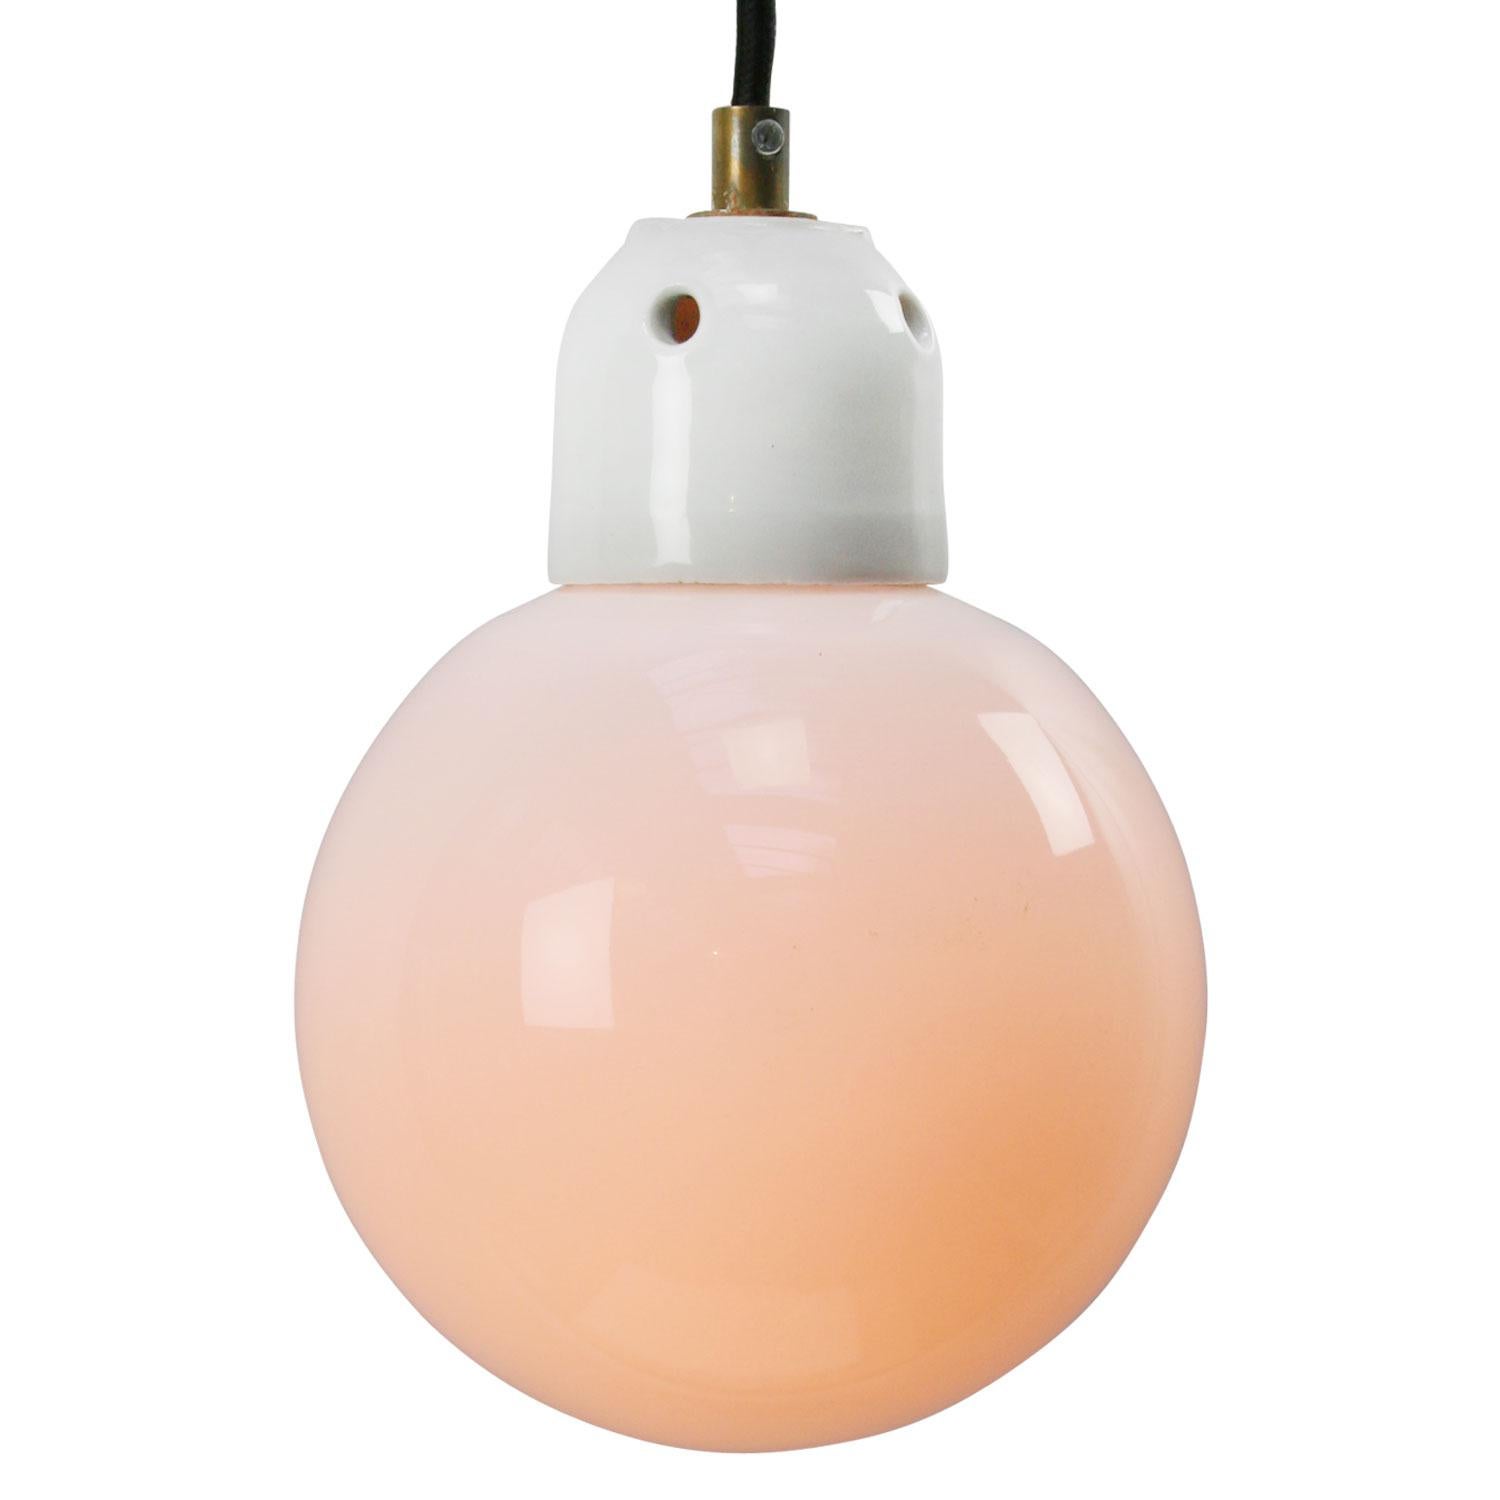 Opaline glass pendant.
2 meter black wire
Porcelain top with brass strain relief

Weight: 0.90 kg / 2 lb

E14 bulb holder. Priced per individual item. All lamps have been made suitable by international standards for incandescent light bulbs,